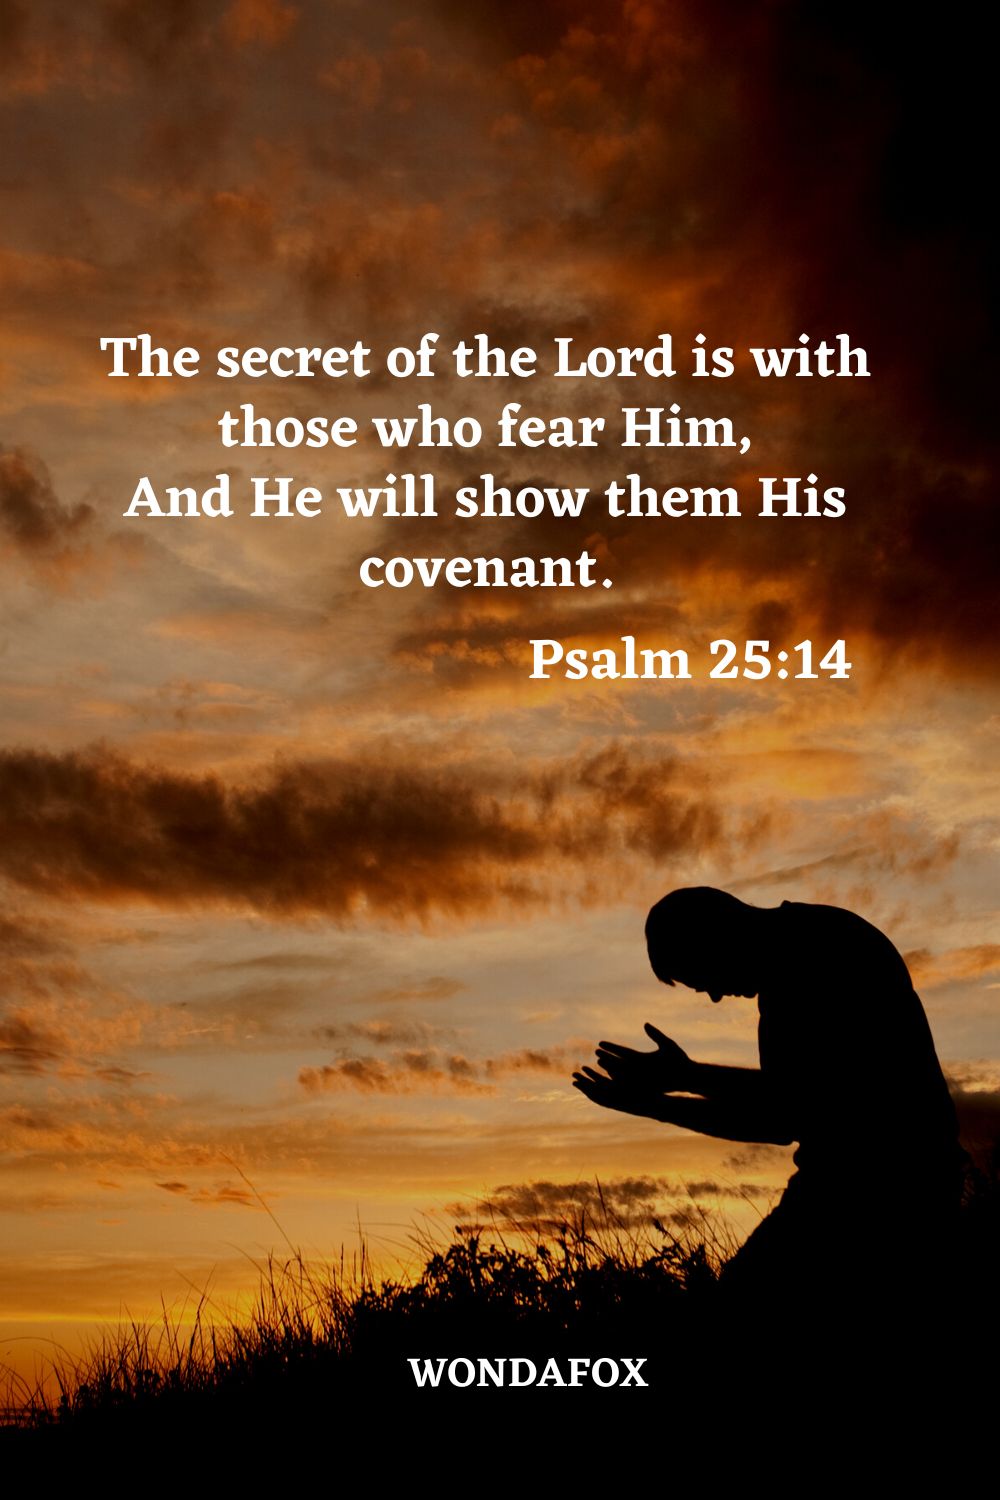 The secret of the Lord is with those who fear Him,
And He will show them His covenant.
Psalm 25:14